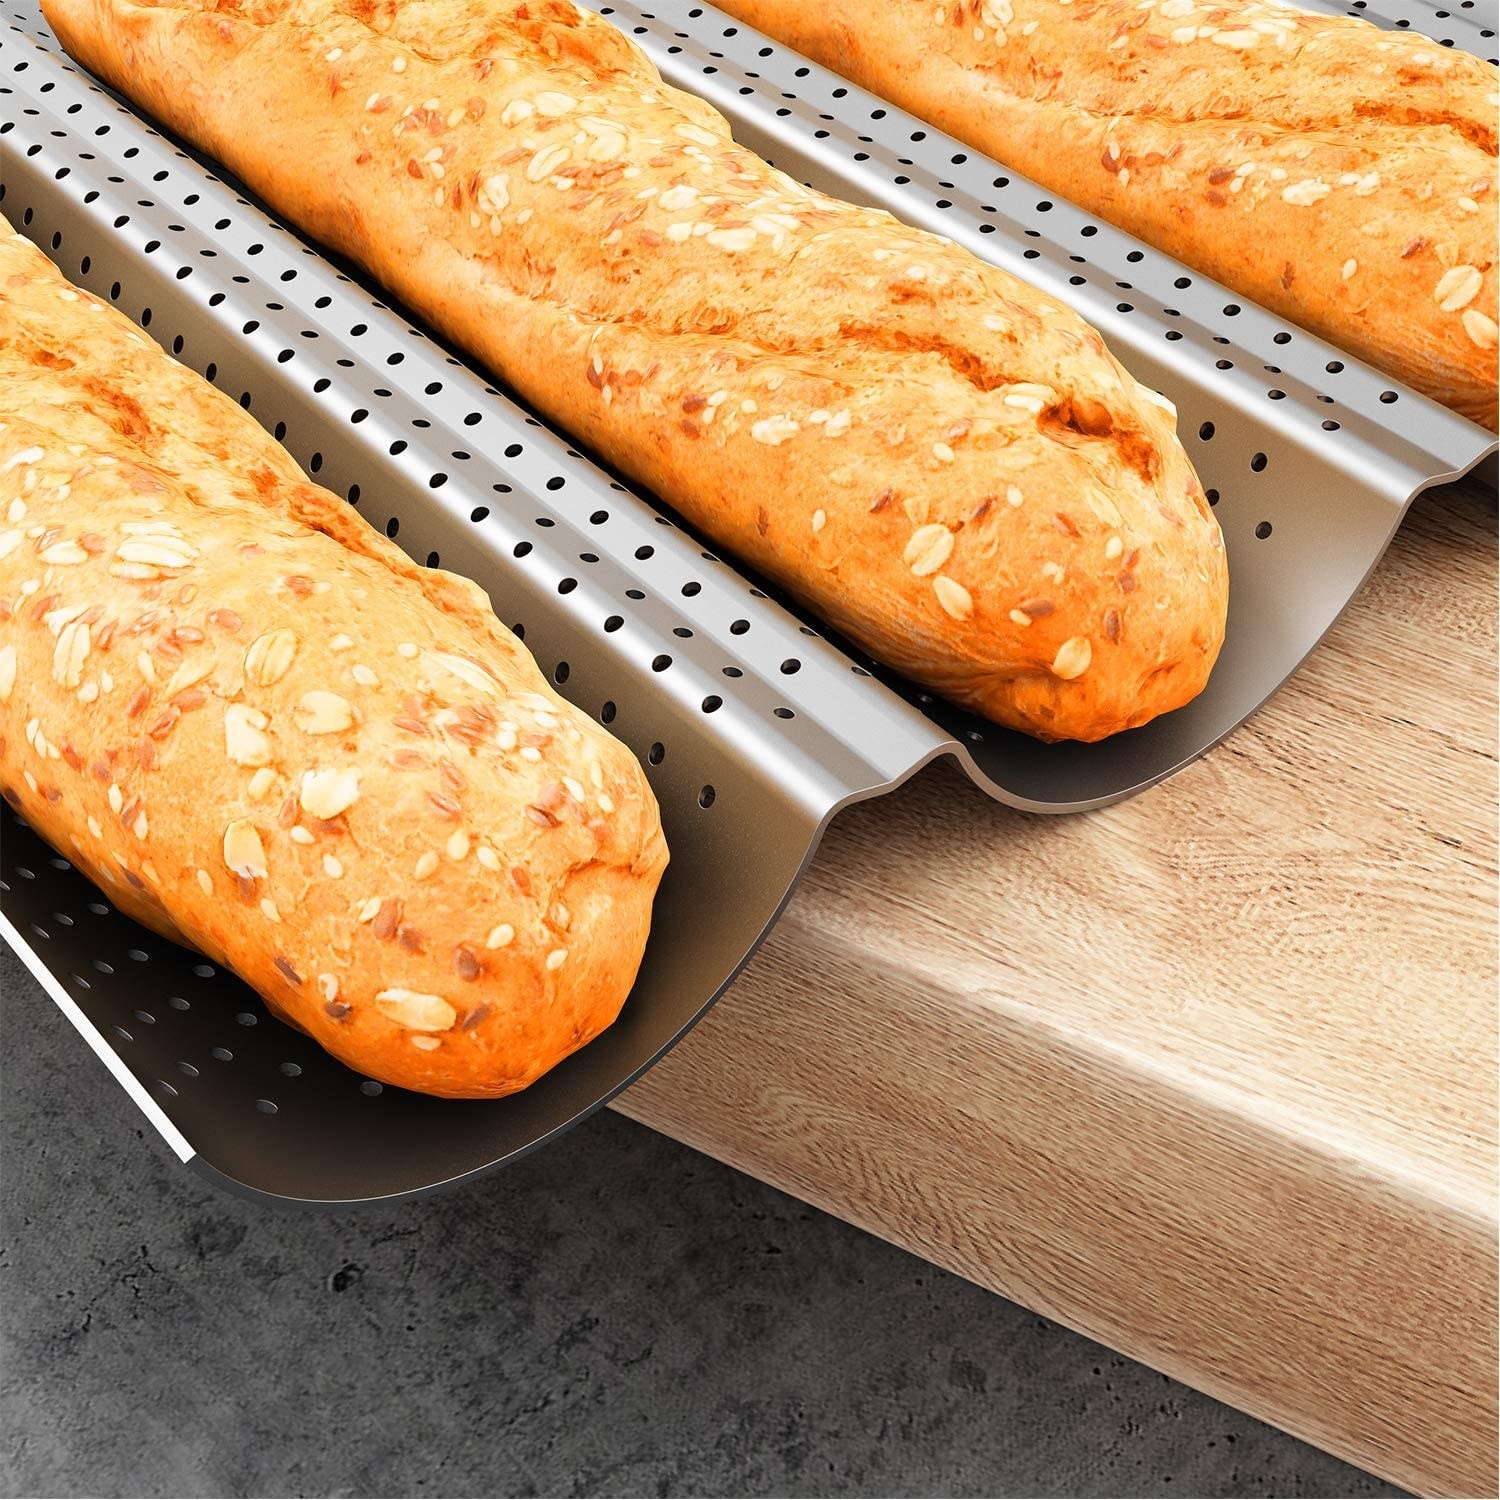 Baguettes resting in a baguette making pan